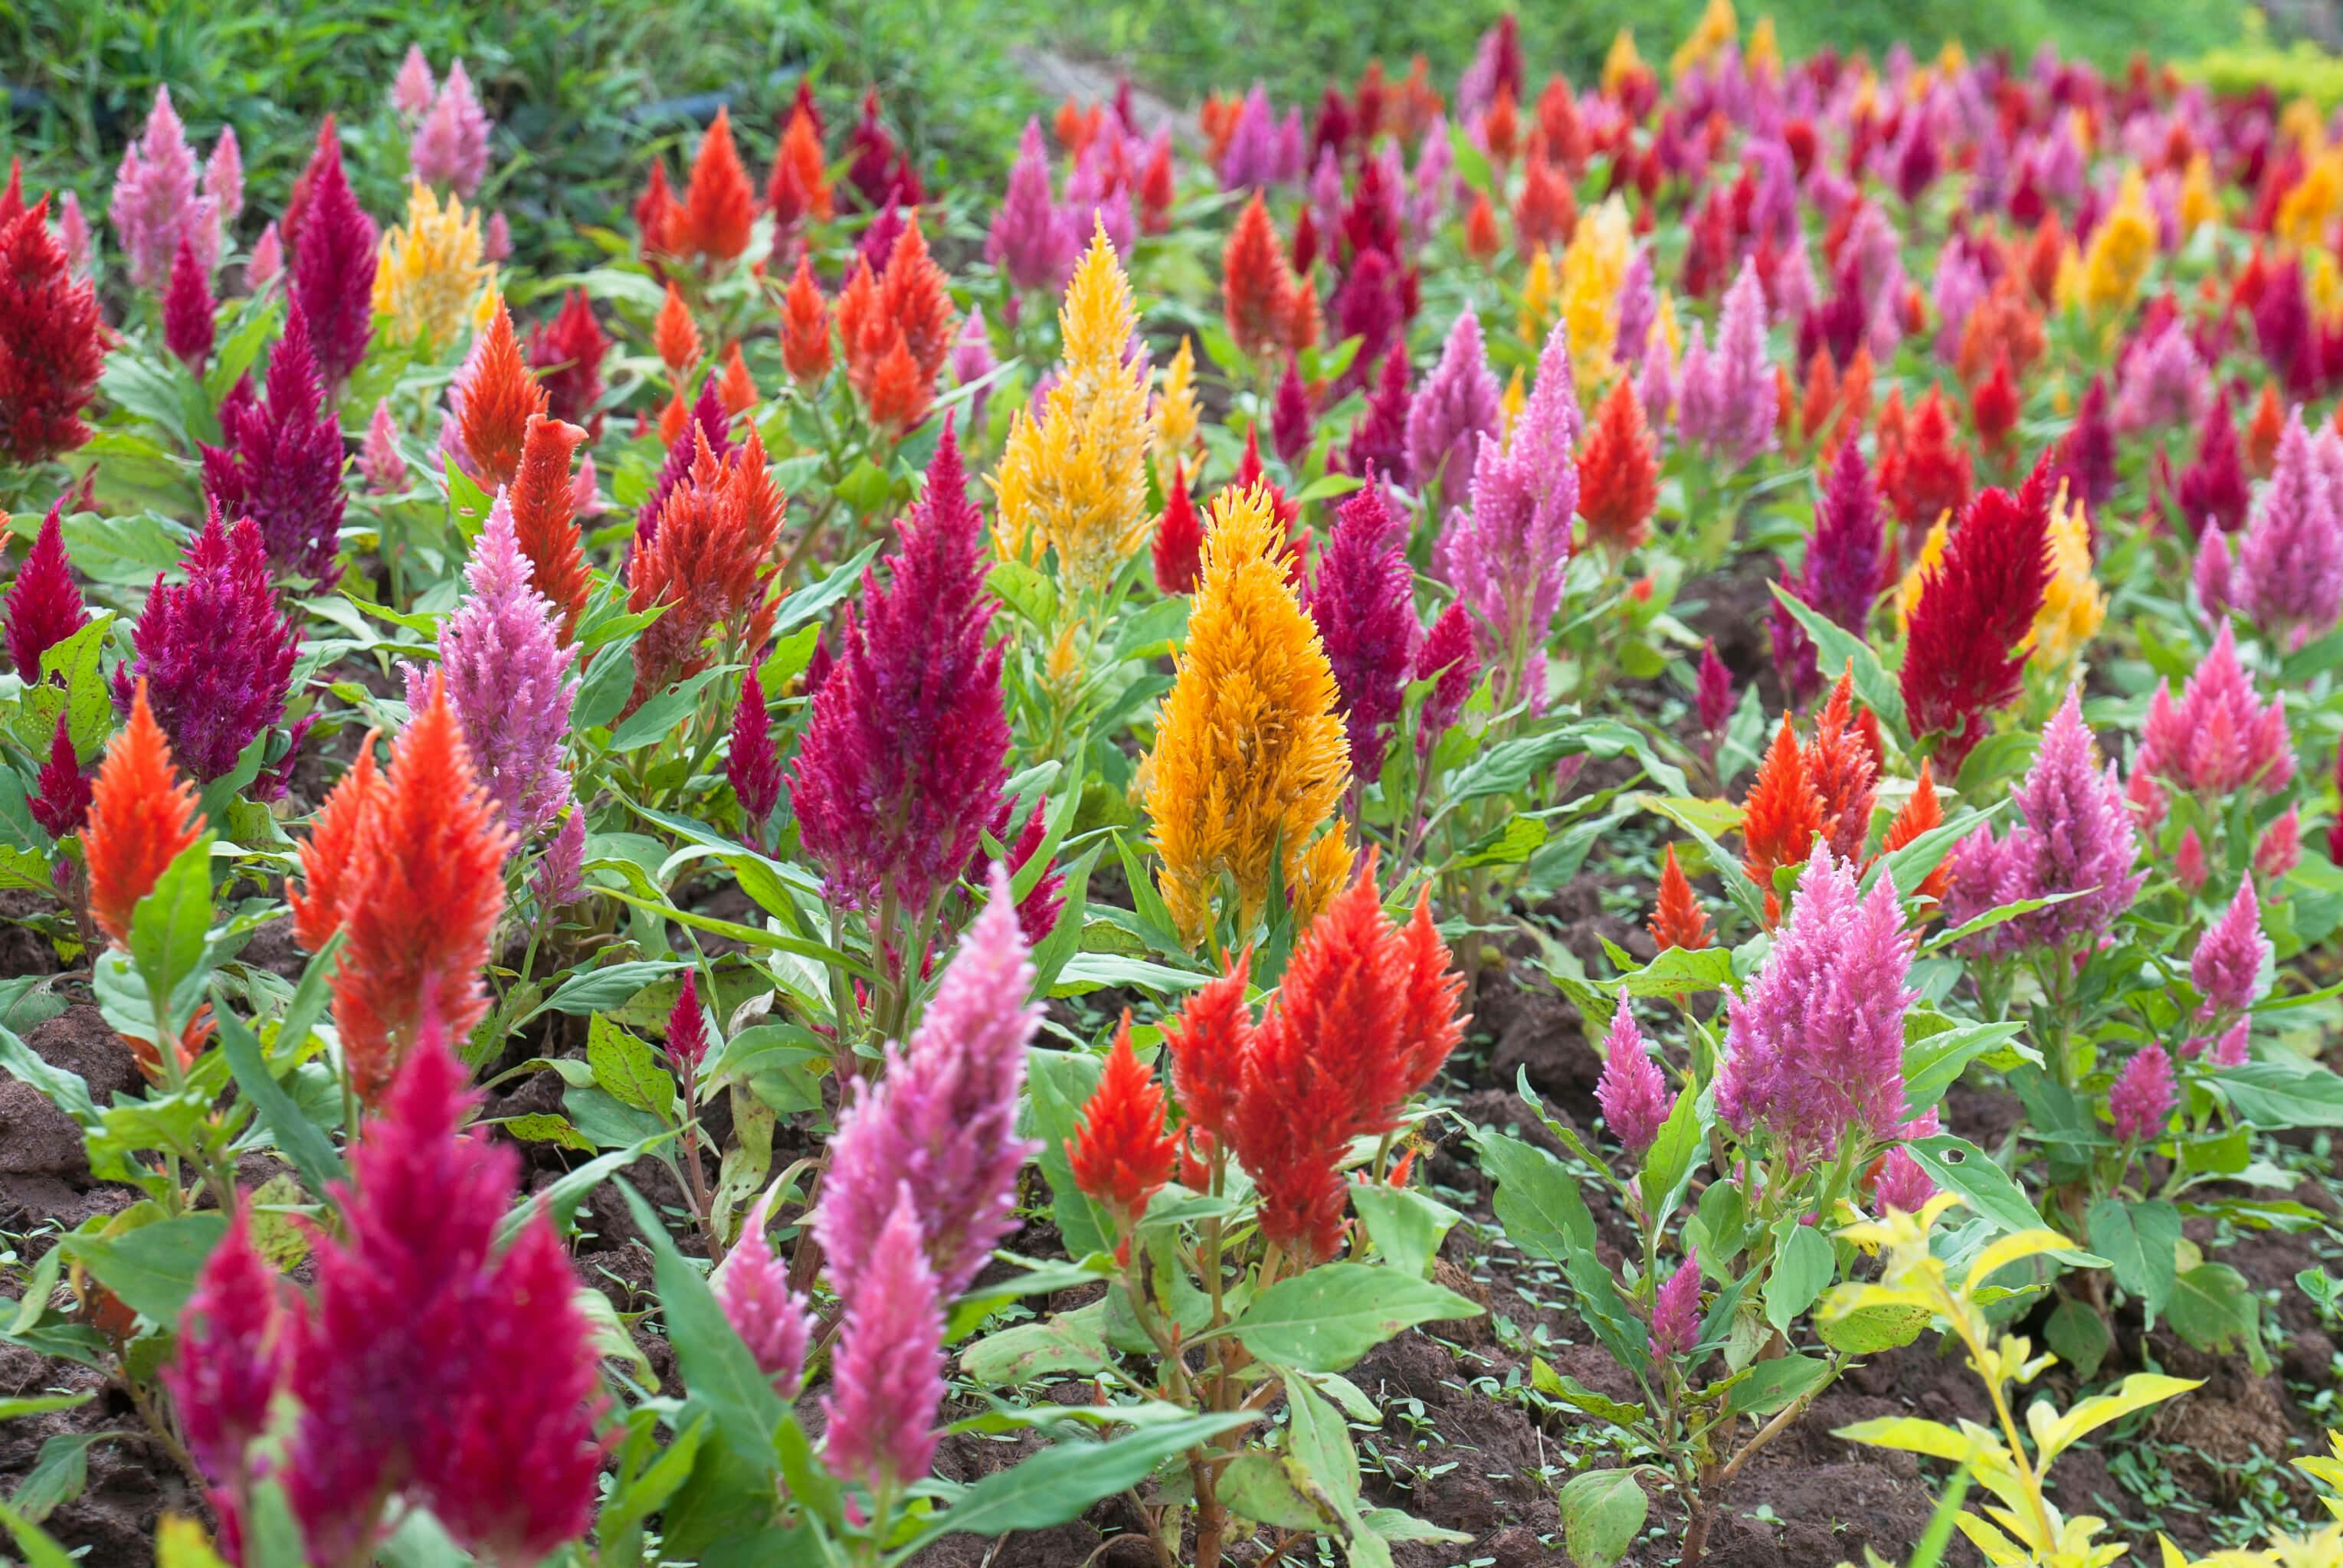 Colorful celosia plant flower blooms in a row